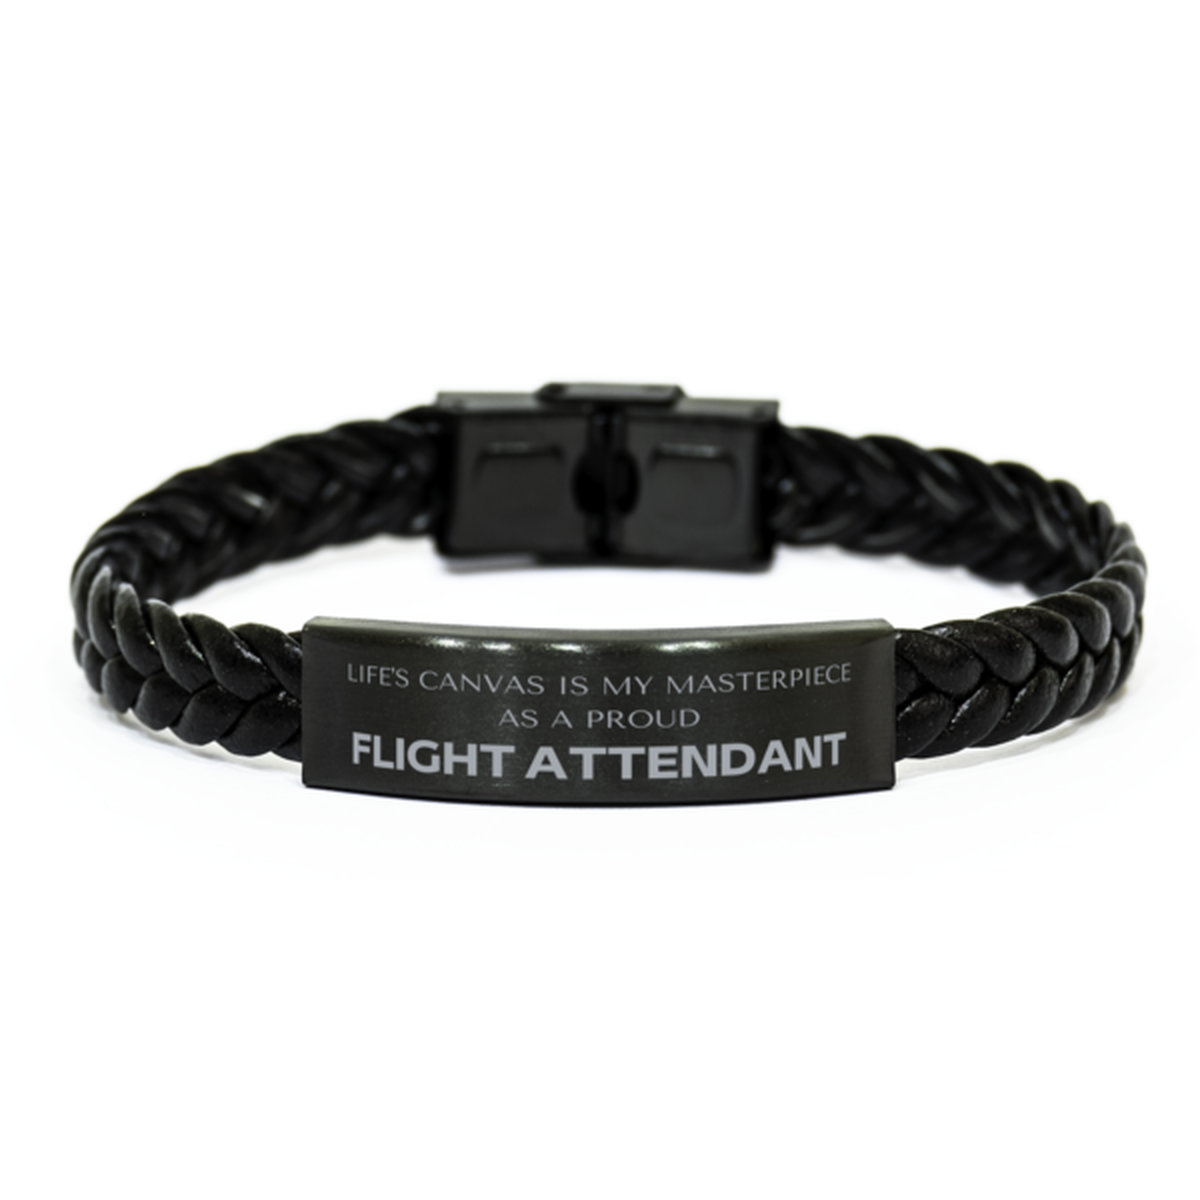 Proud Flight Attendant Gifts, Life's canvas is my masterpiece, Epic Birthday Christmas Unique Braided Leather Bracelet For Flight Attendant, Coworkers, Men, Women, Friends